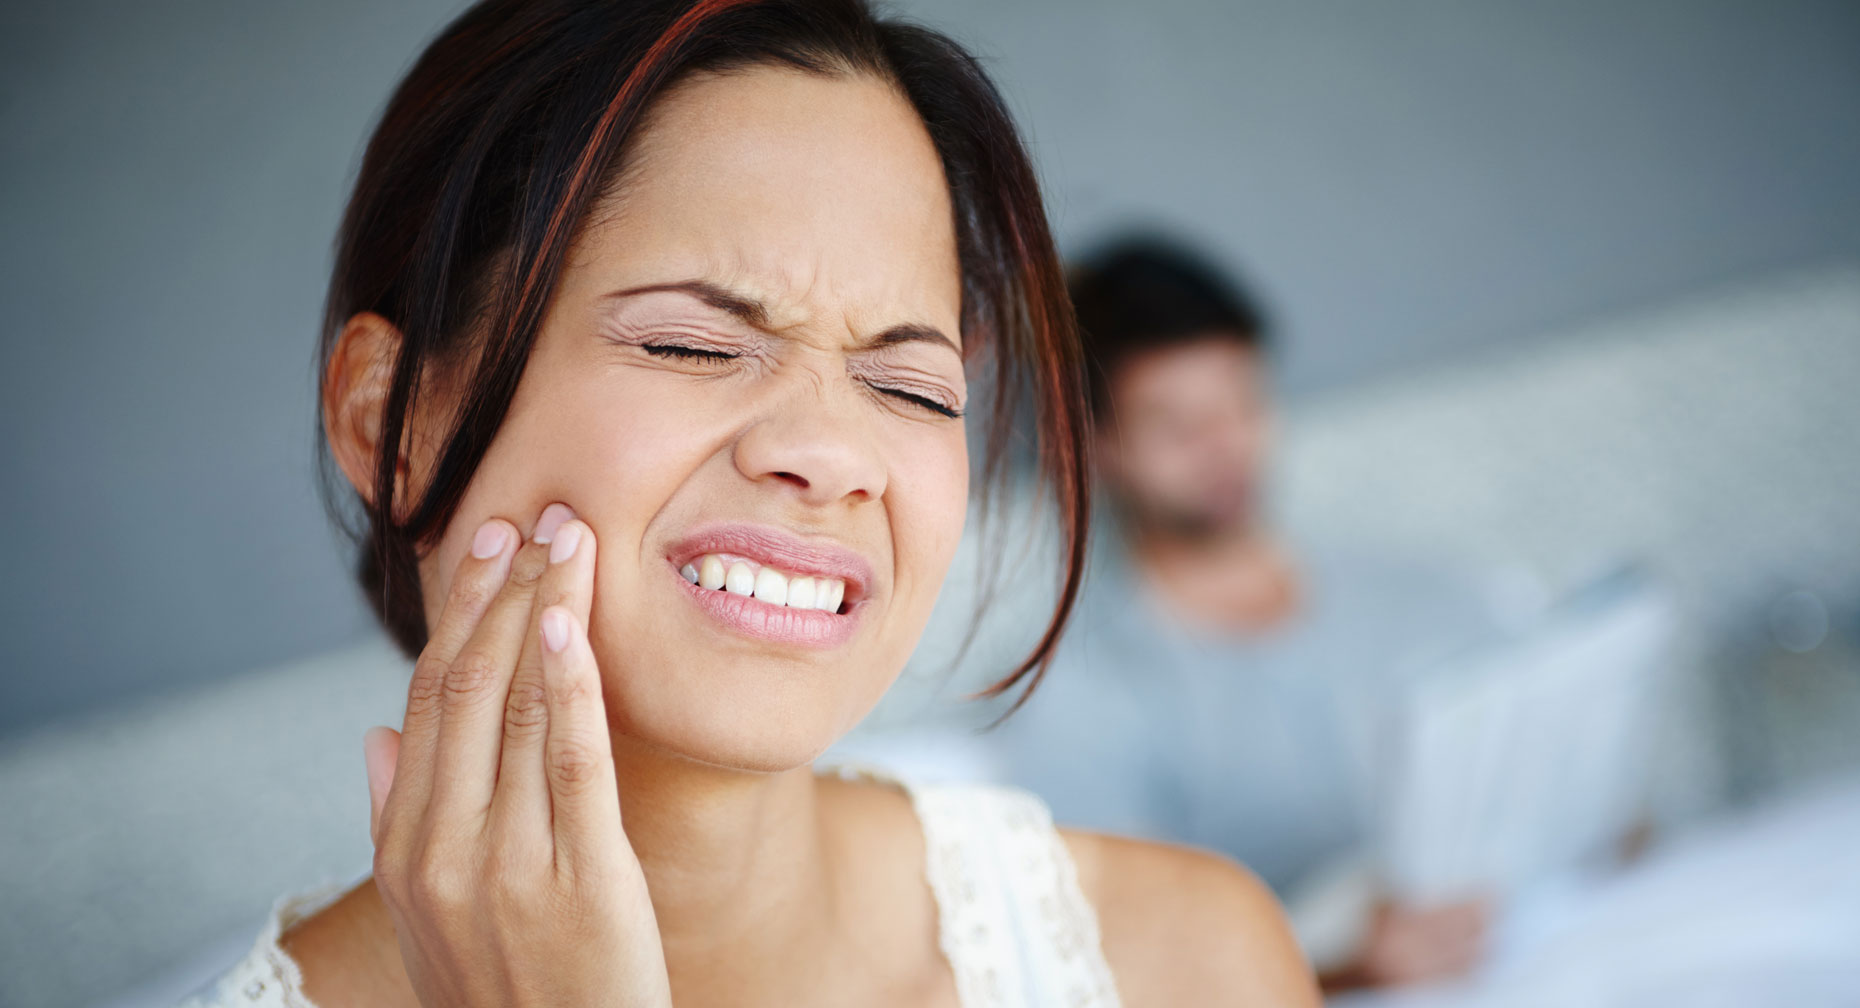 p-w-wmn62572-how-to-relieve-pain-in-jaw-lg.jpg